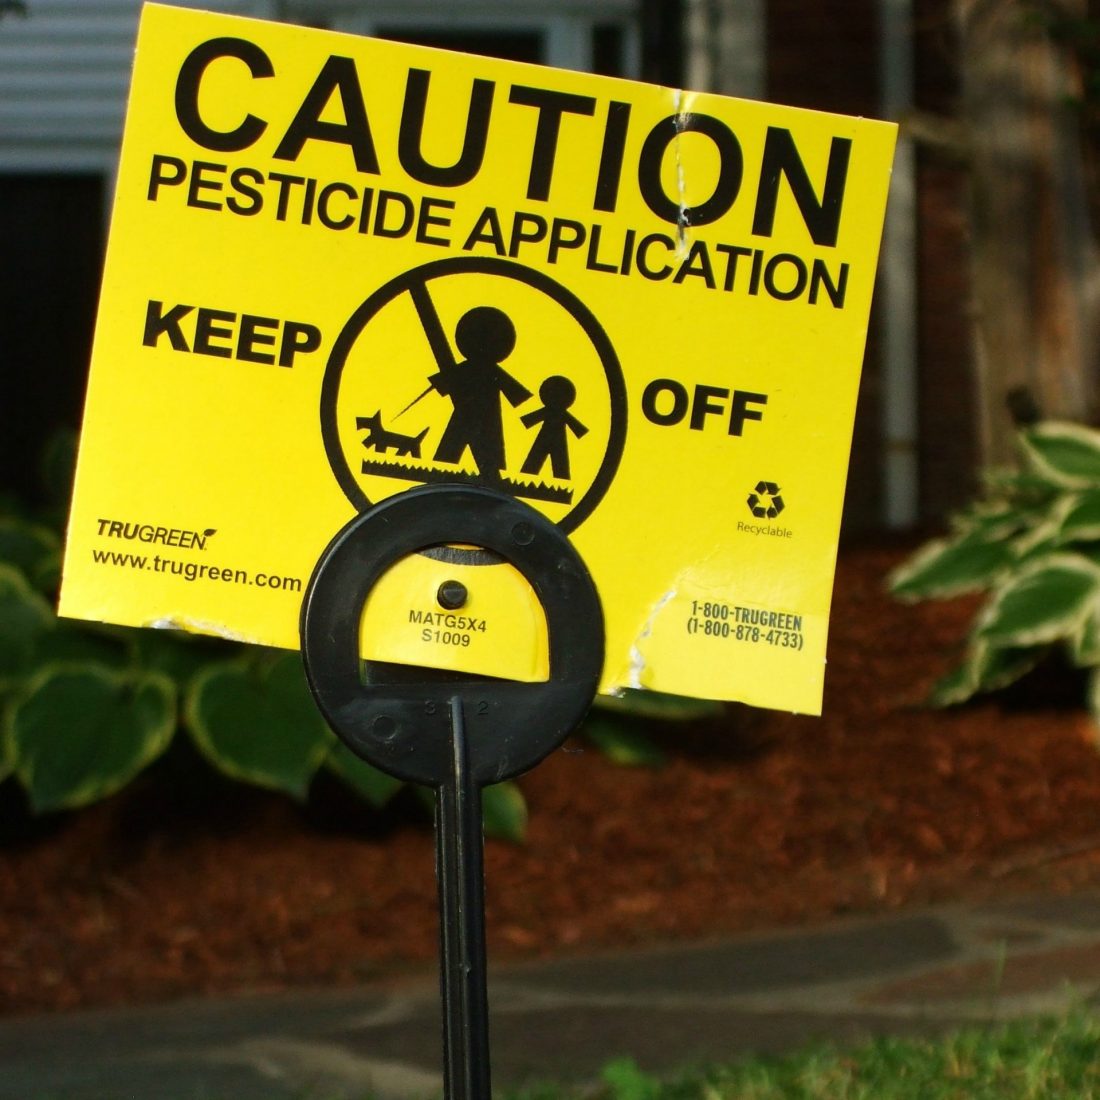 Lawsuit Challenges TruGreen Chemical Lawn Care Company for Deceptive Safety  Claims; Pesticide Applications Stopped by Some States During COVID-19  Crisis as Nonessential - Beyond Pesticides Daily News Blog